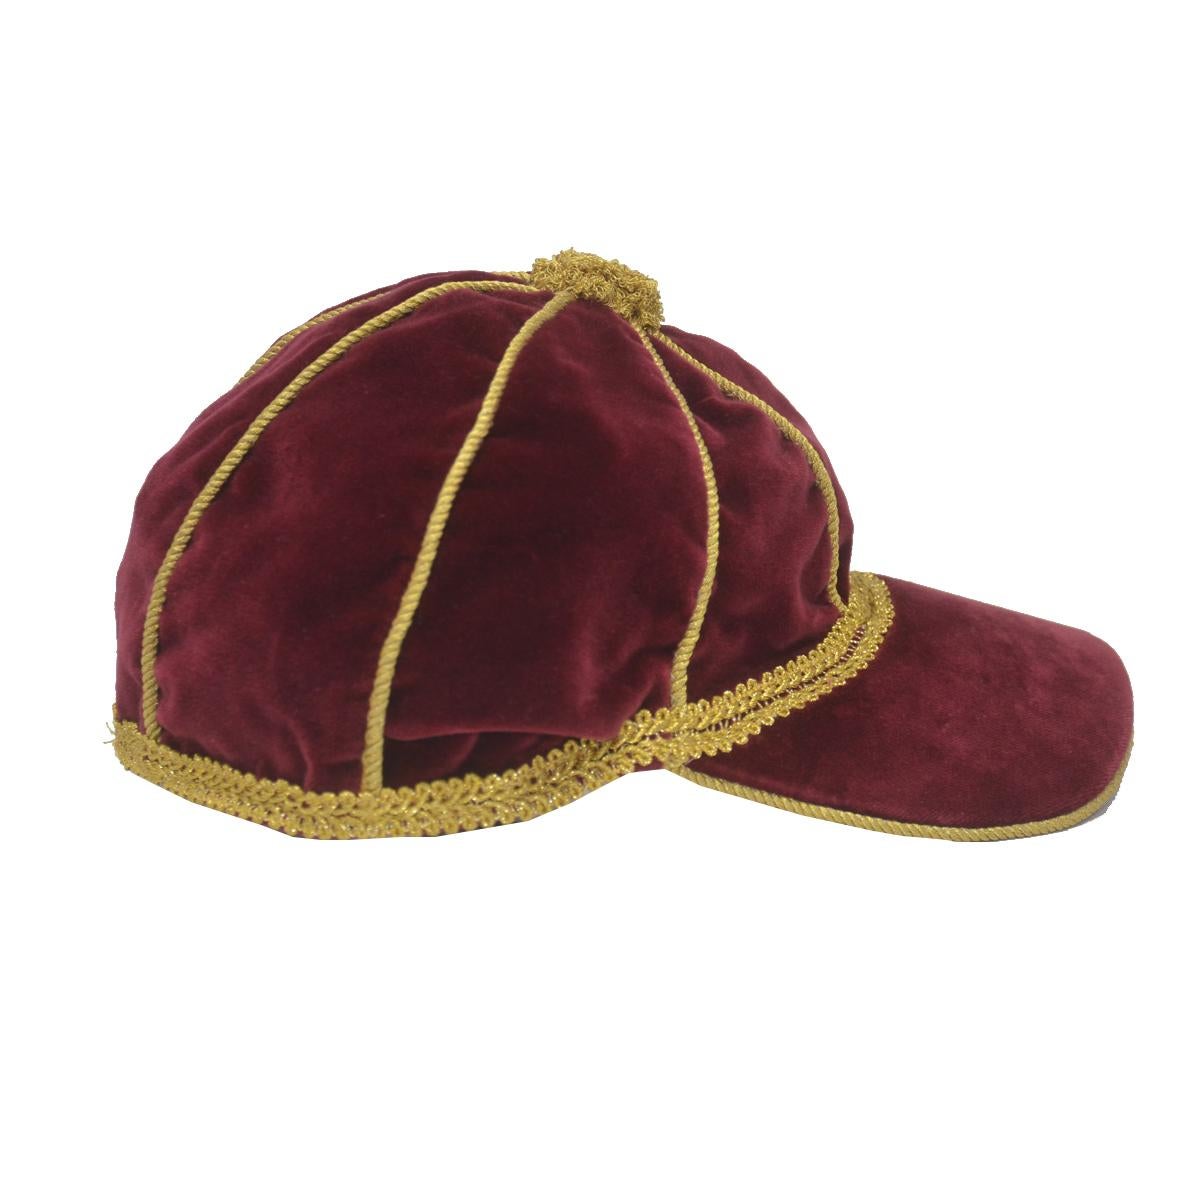 hat with a tassle